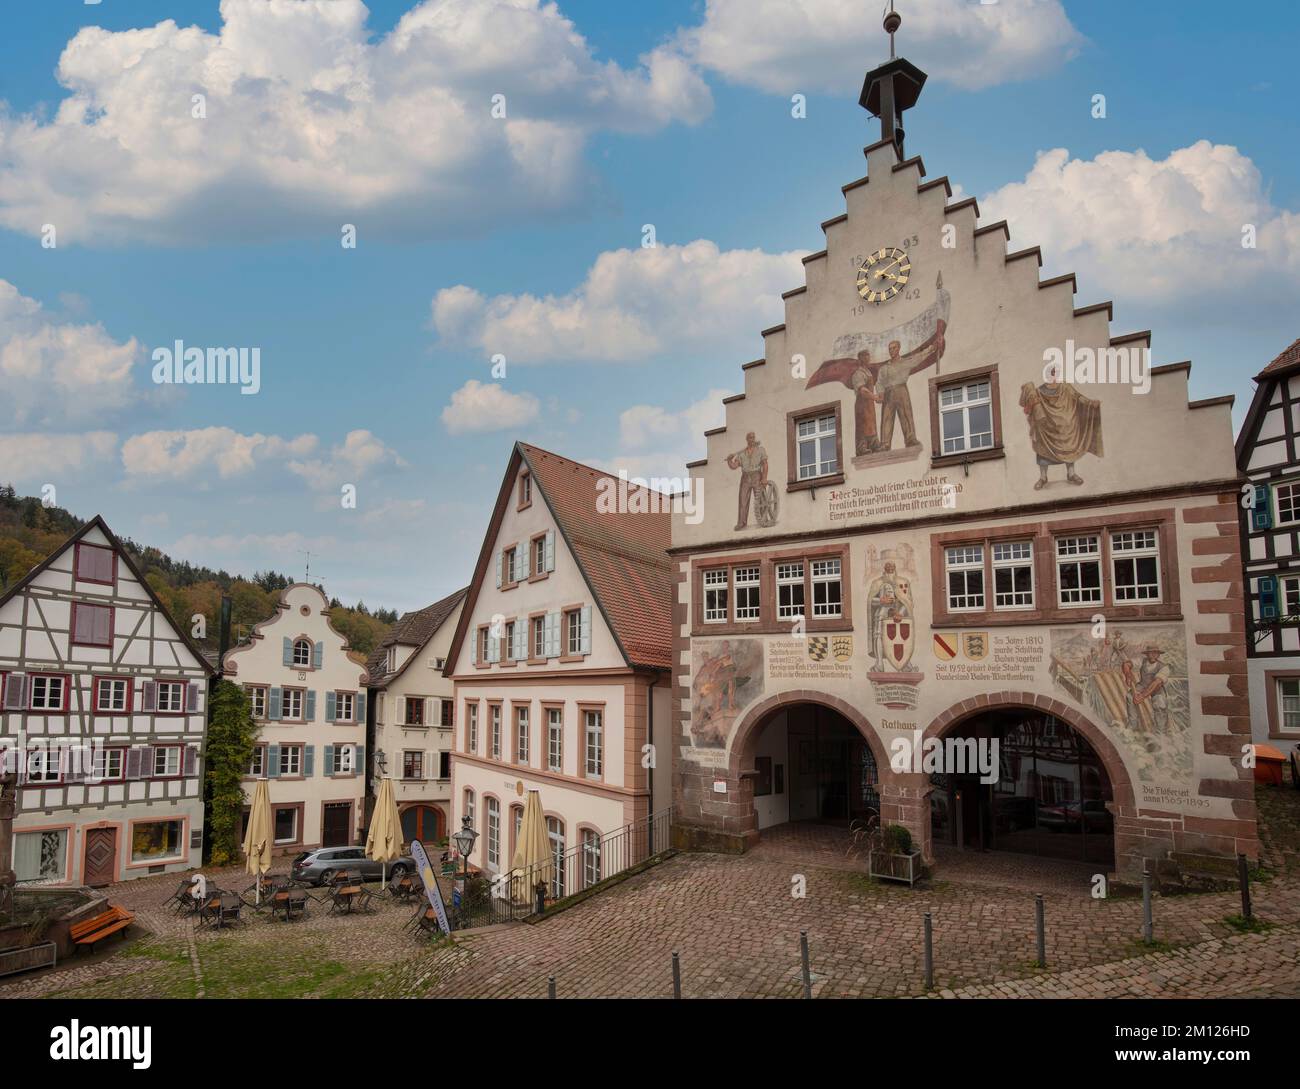 Germany, Baden-Wuerttemberg, Black Forest, Schiltach, town hall, marketplace, half-timbered house Stock Photo